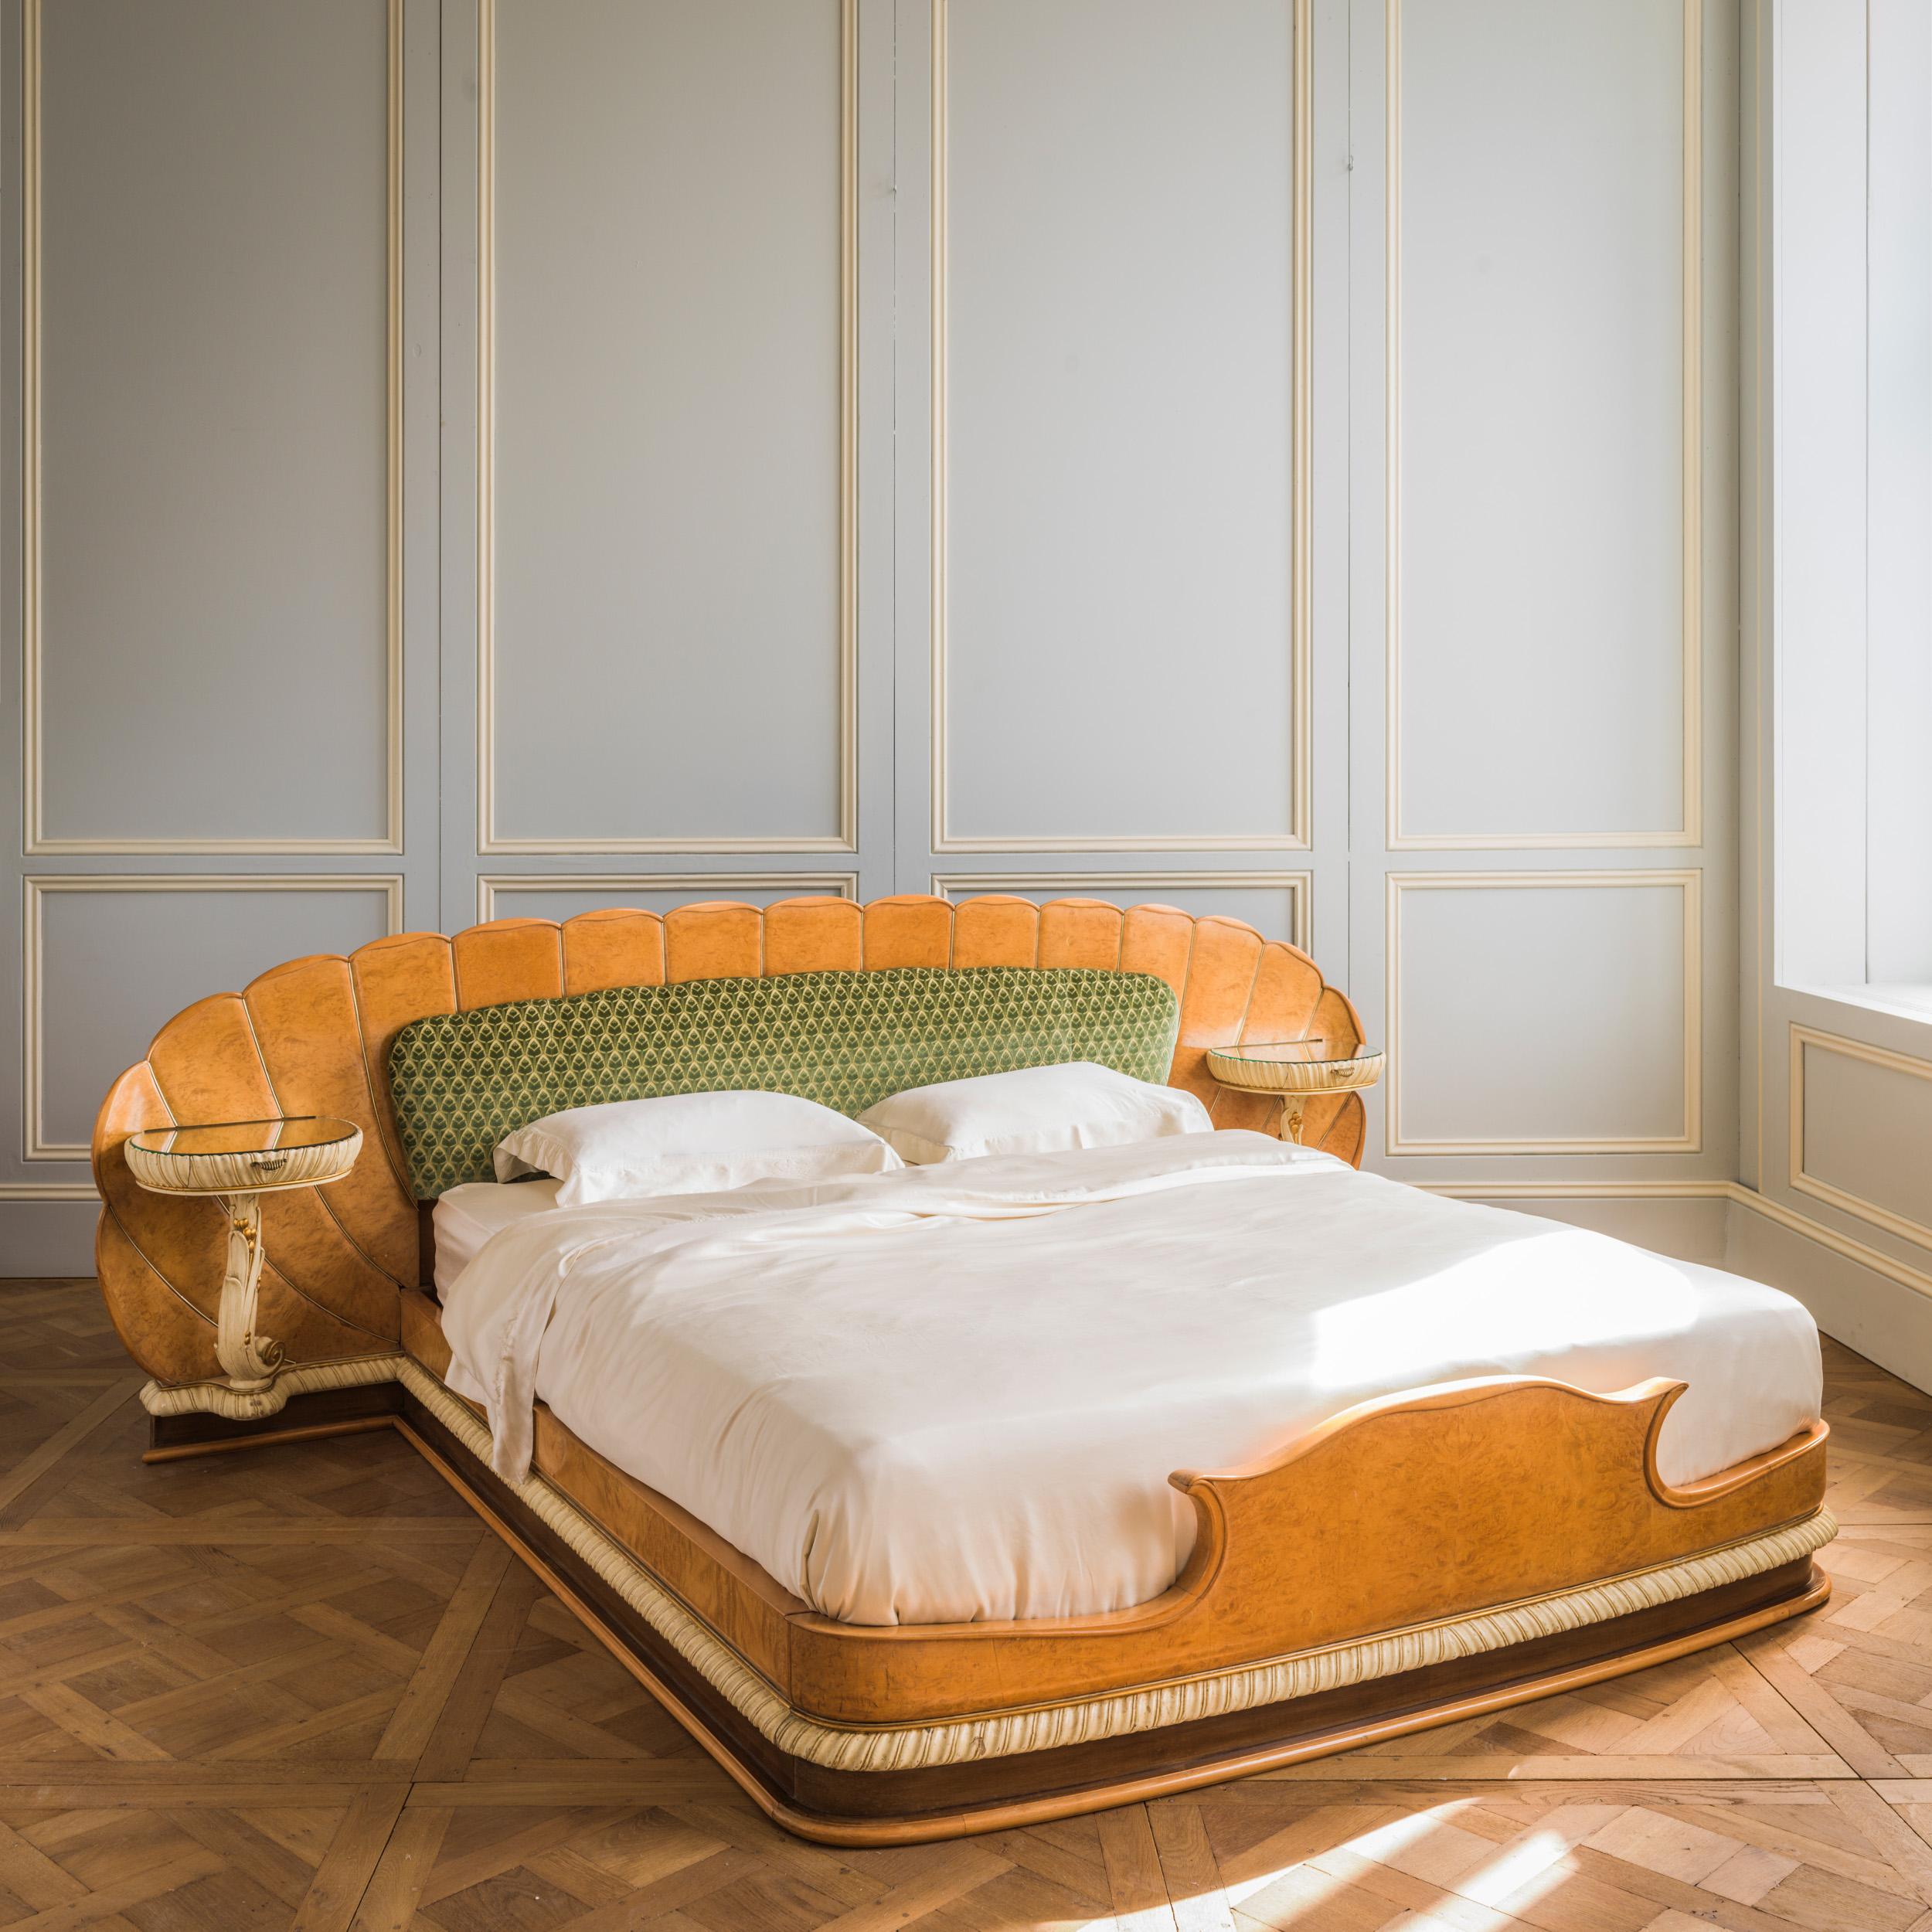 A stunning Italian bed, circa early 1940's, inspired by the Milanese designer, Giovanni Gariboldi. The bed features an Art Deco scalloped headboard with built in, curvaceous bedside tables, finished in a striking blond, burr elm, wood veneer with